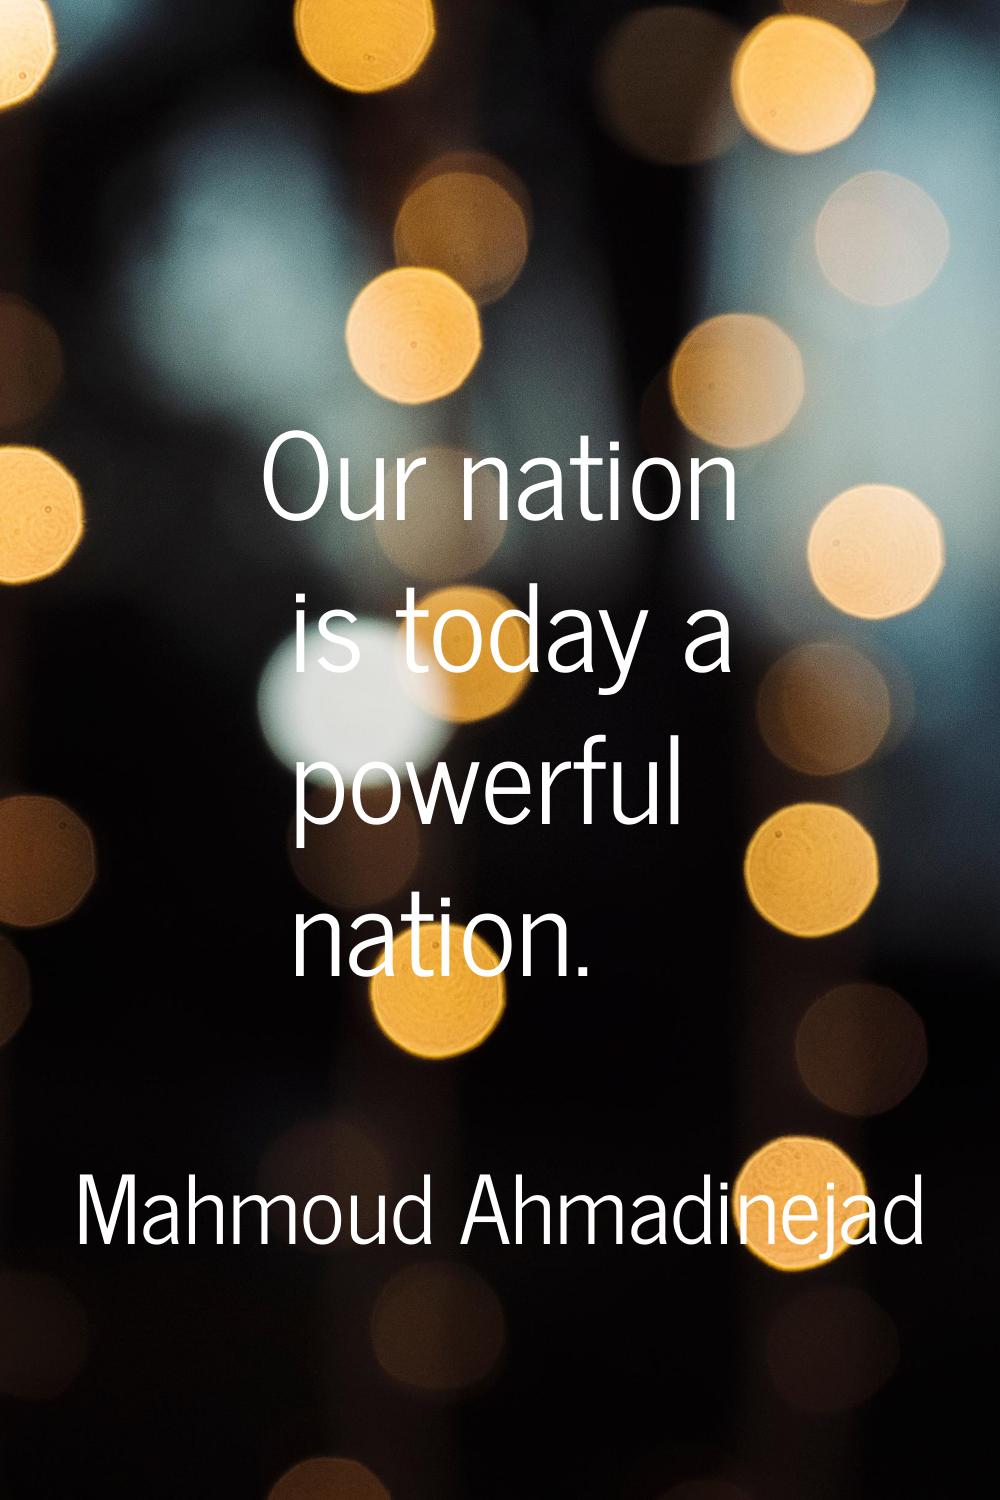 Our nation is today a powerful nation.